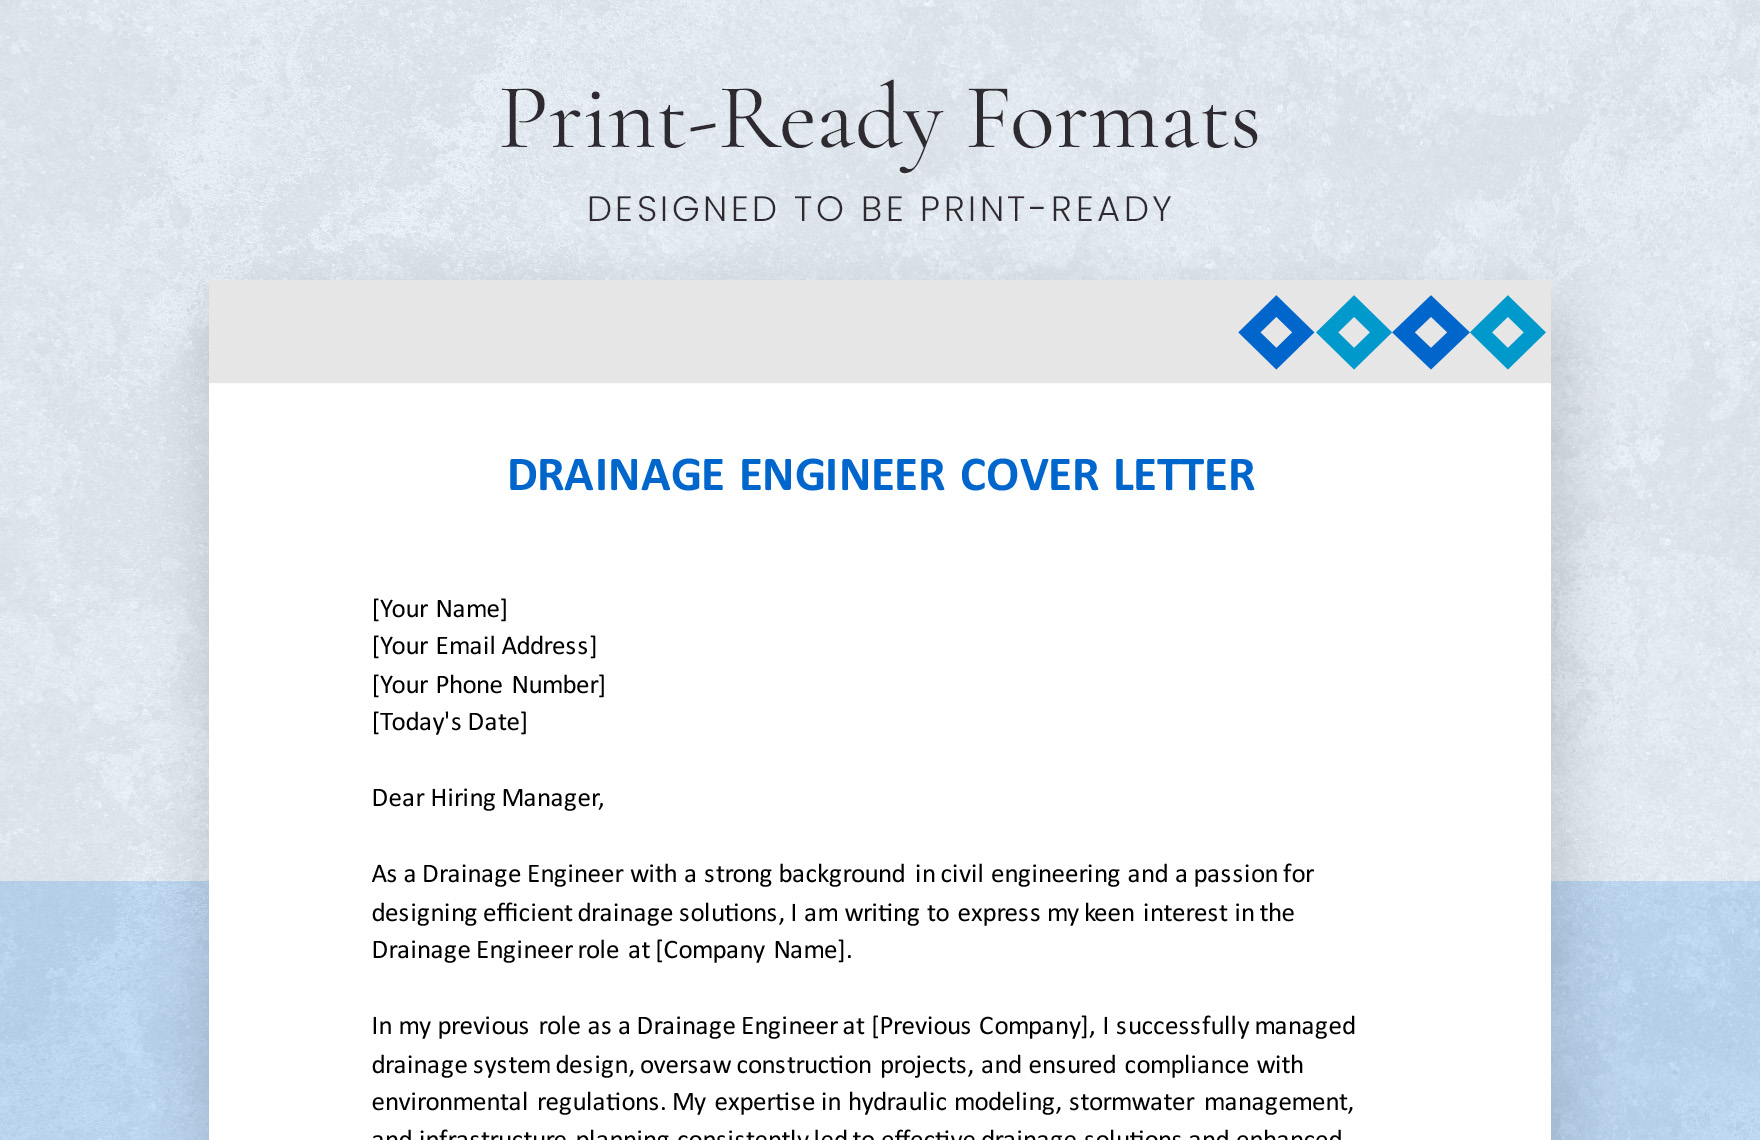 Drainage Engineer Cover Letter